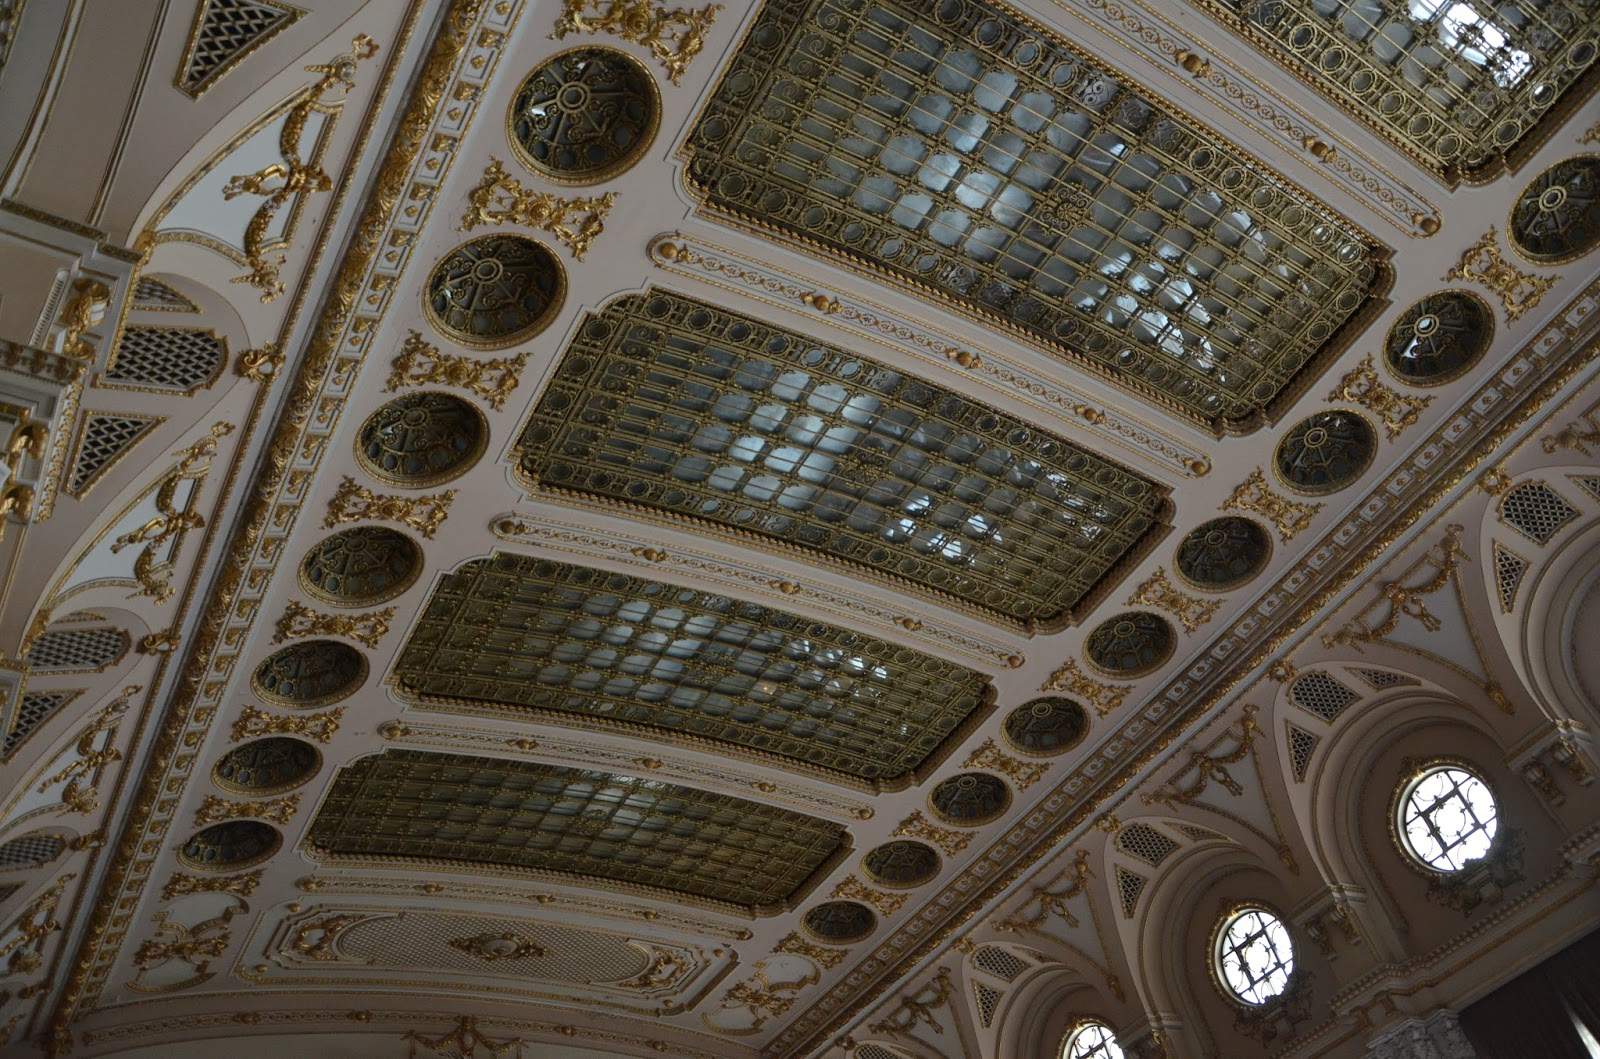 Ceiling of Cuza Hall at Palace of Parliament in Bucharest, Romania